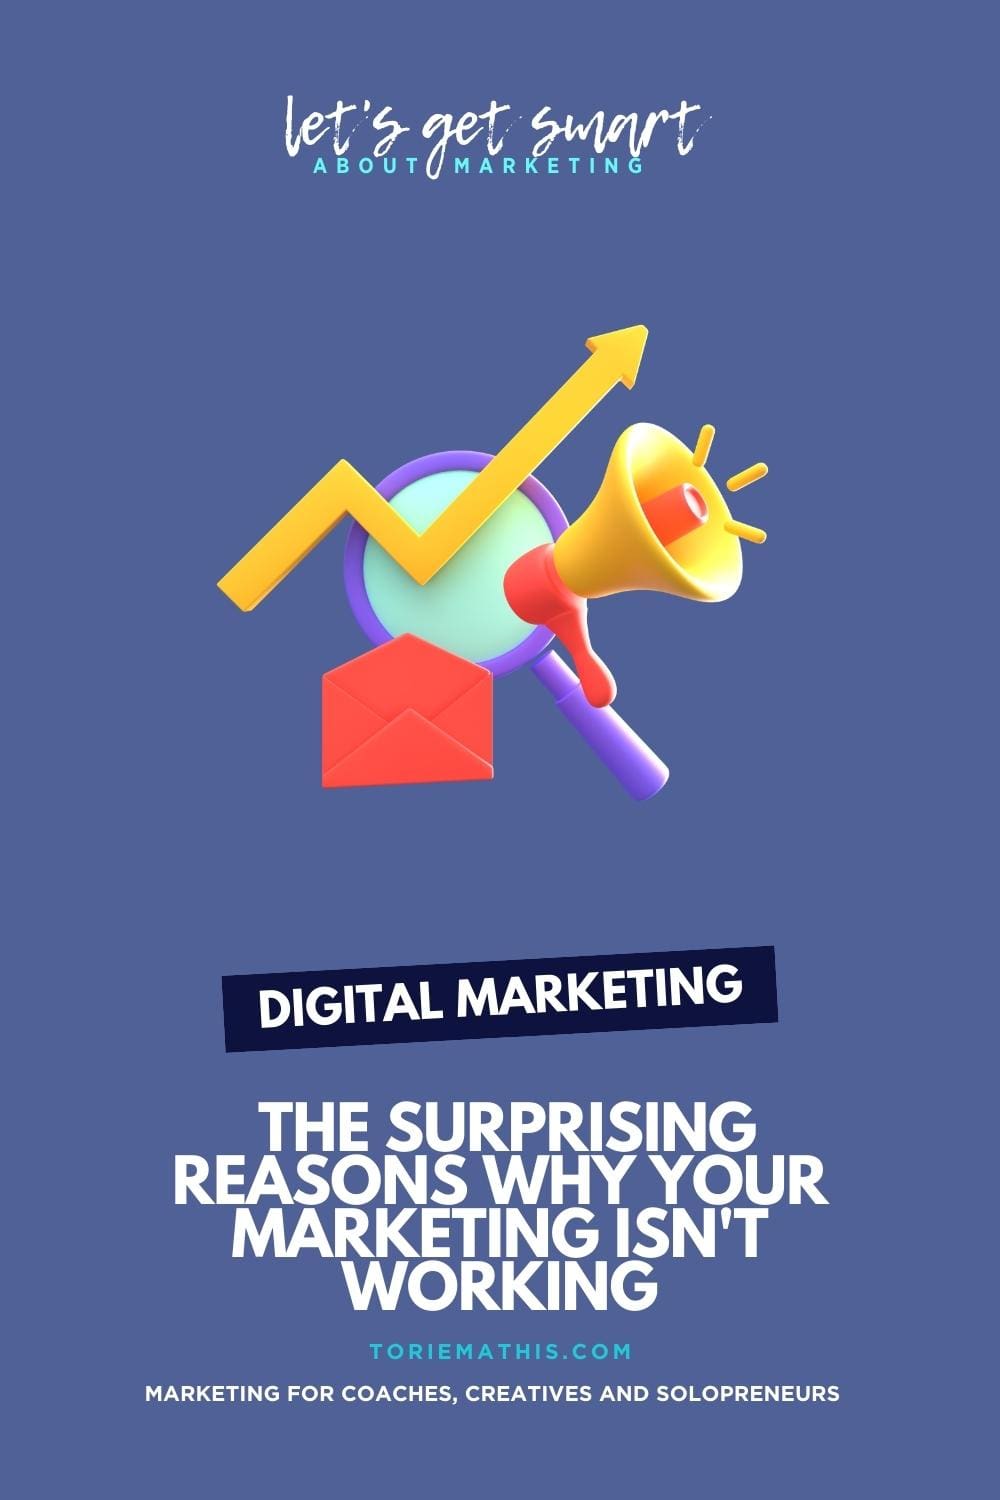 The Surprising Reasons Why Your Marketing Isn't Working - Marketing Tips